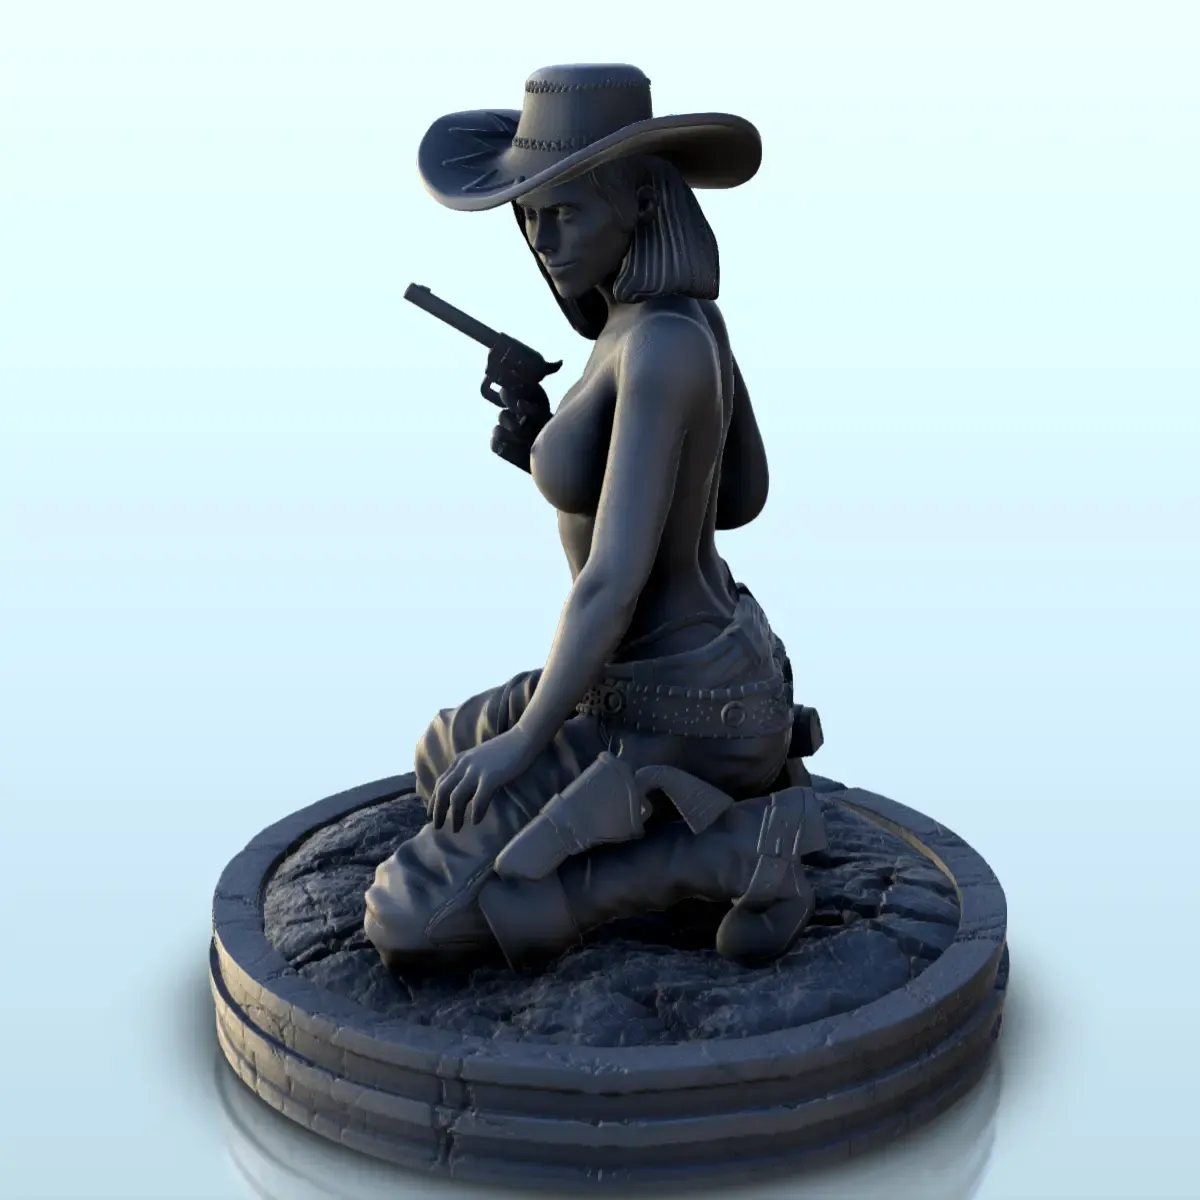 Half-naked woman crouching with revolver (22) - Old West Fig